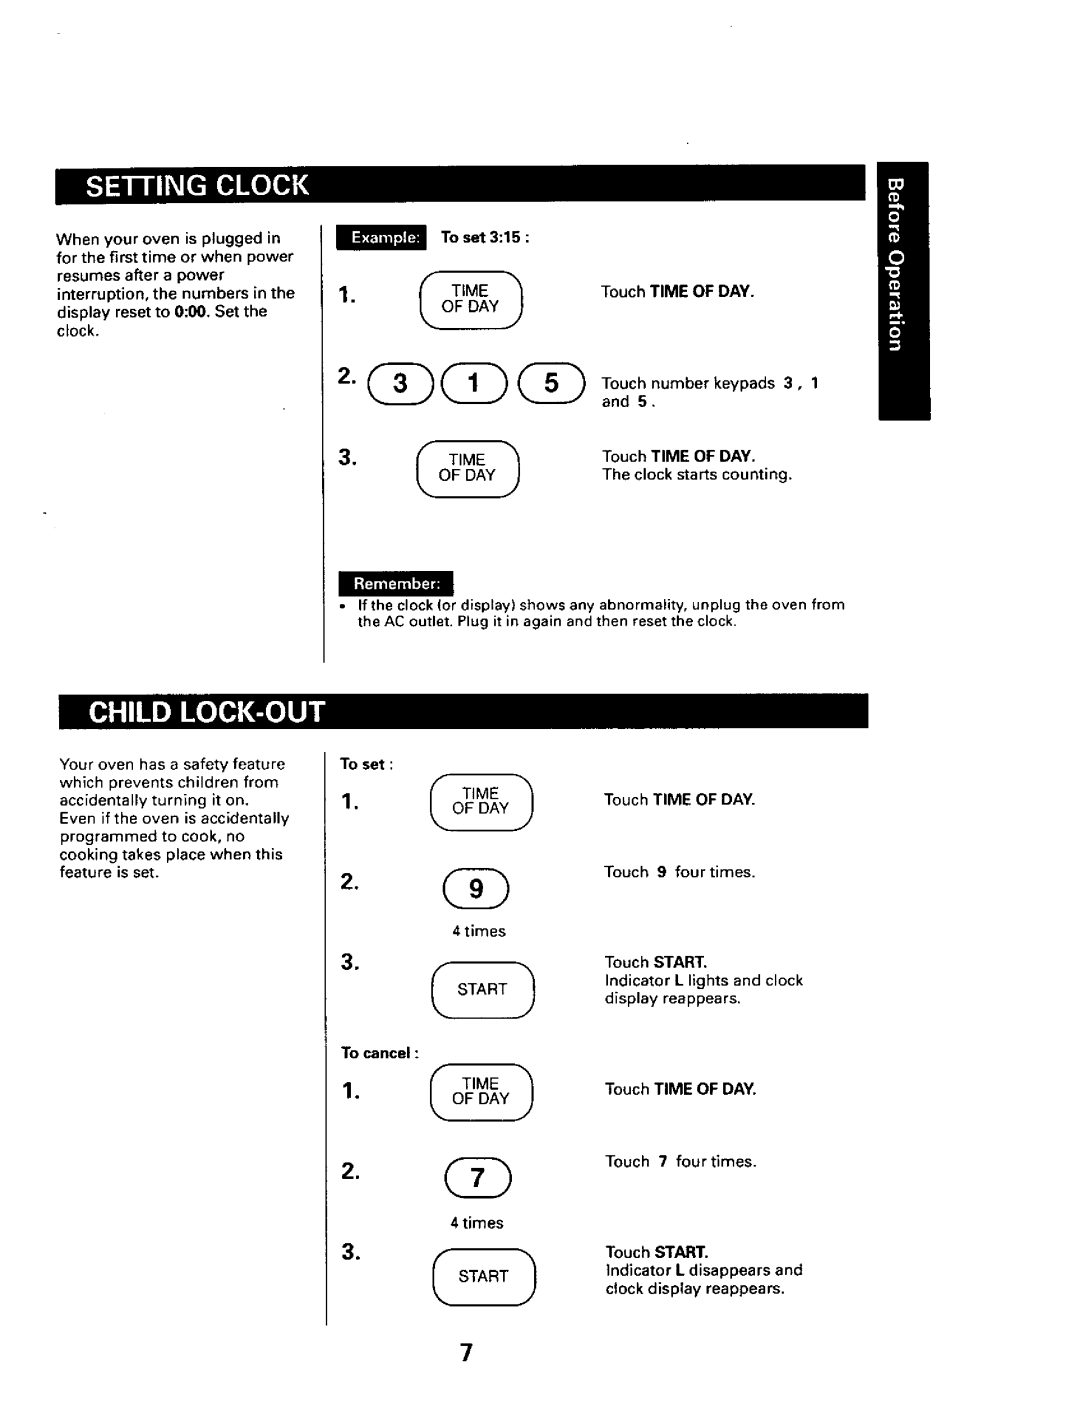 Sears 565.66101 owner manual I Time, Touchnumberkeypads3 